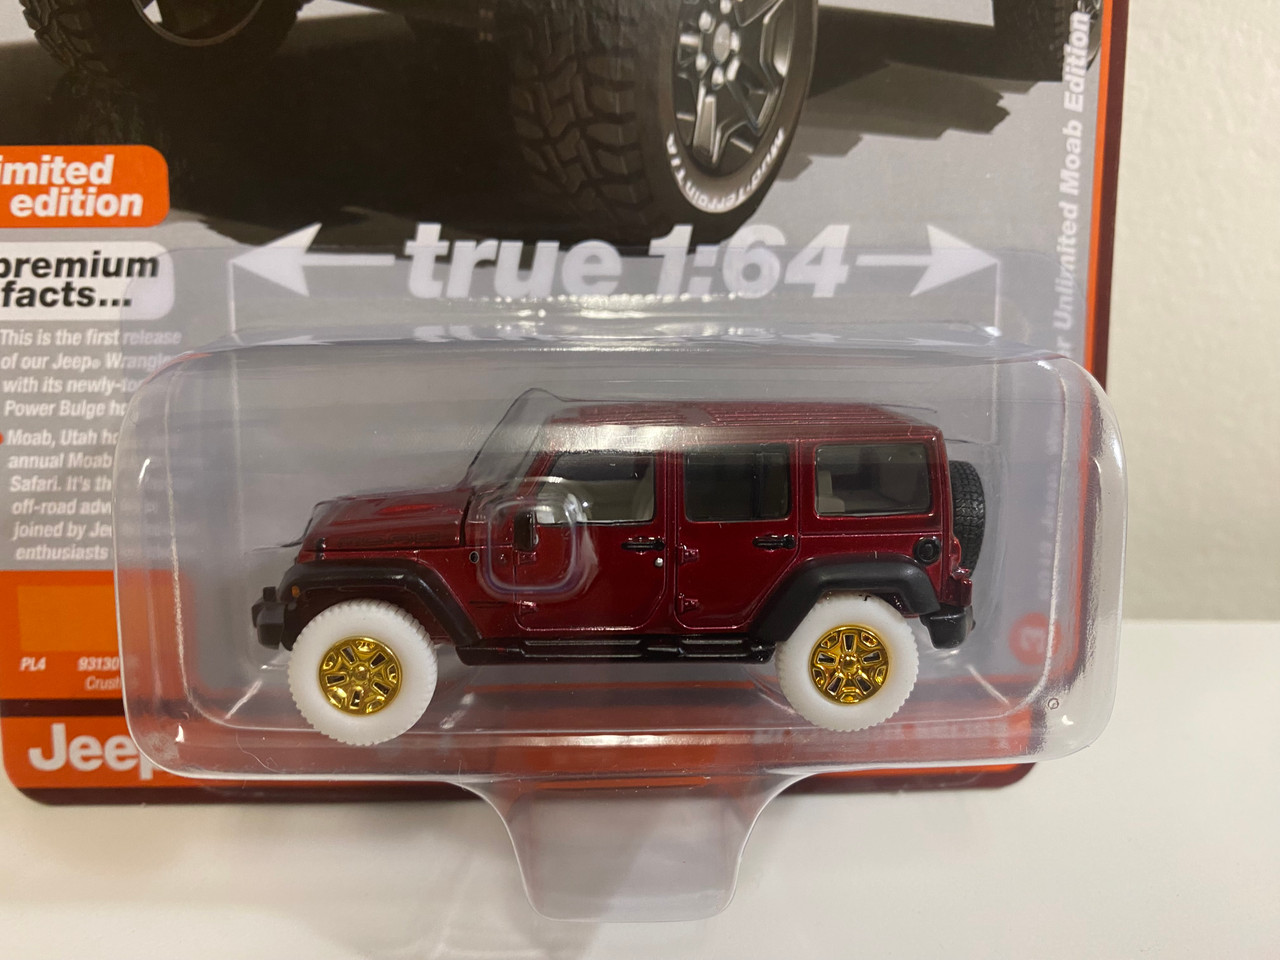 CHASE CAR 2013 Jeep Wrangler Unlimited Moab Edition Crush Orange "Sport Utility" Limited Edition 1/64 Diecast Model Car by Auto World